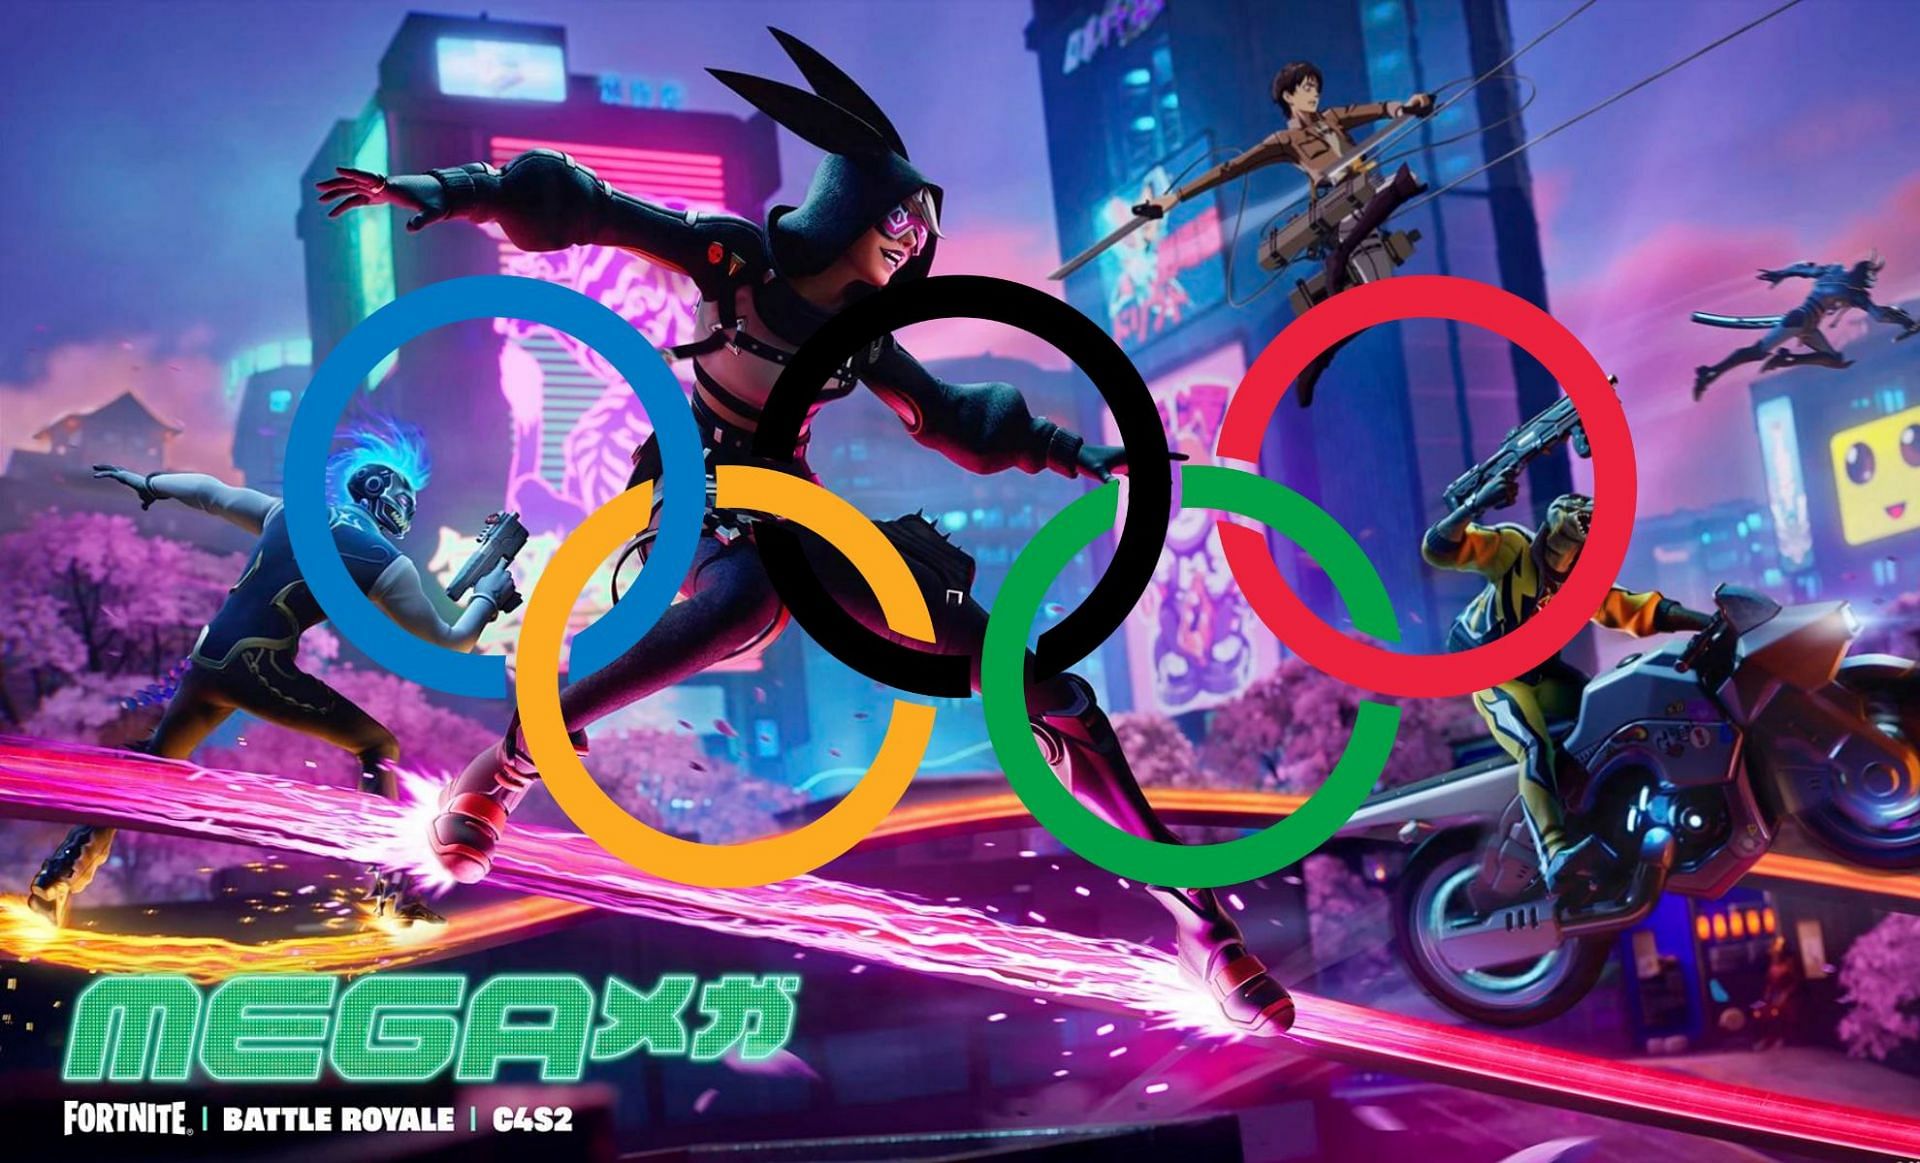 Fortnite officially an Olympic sport